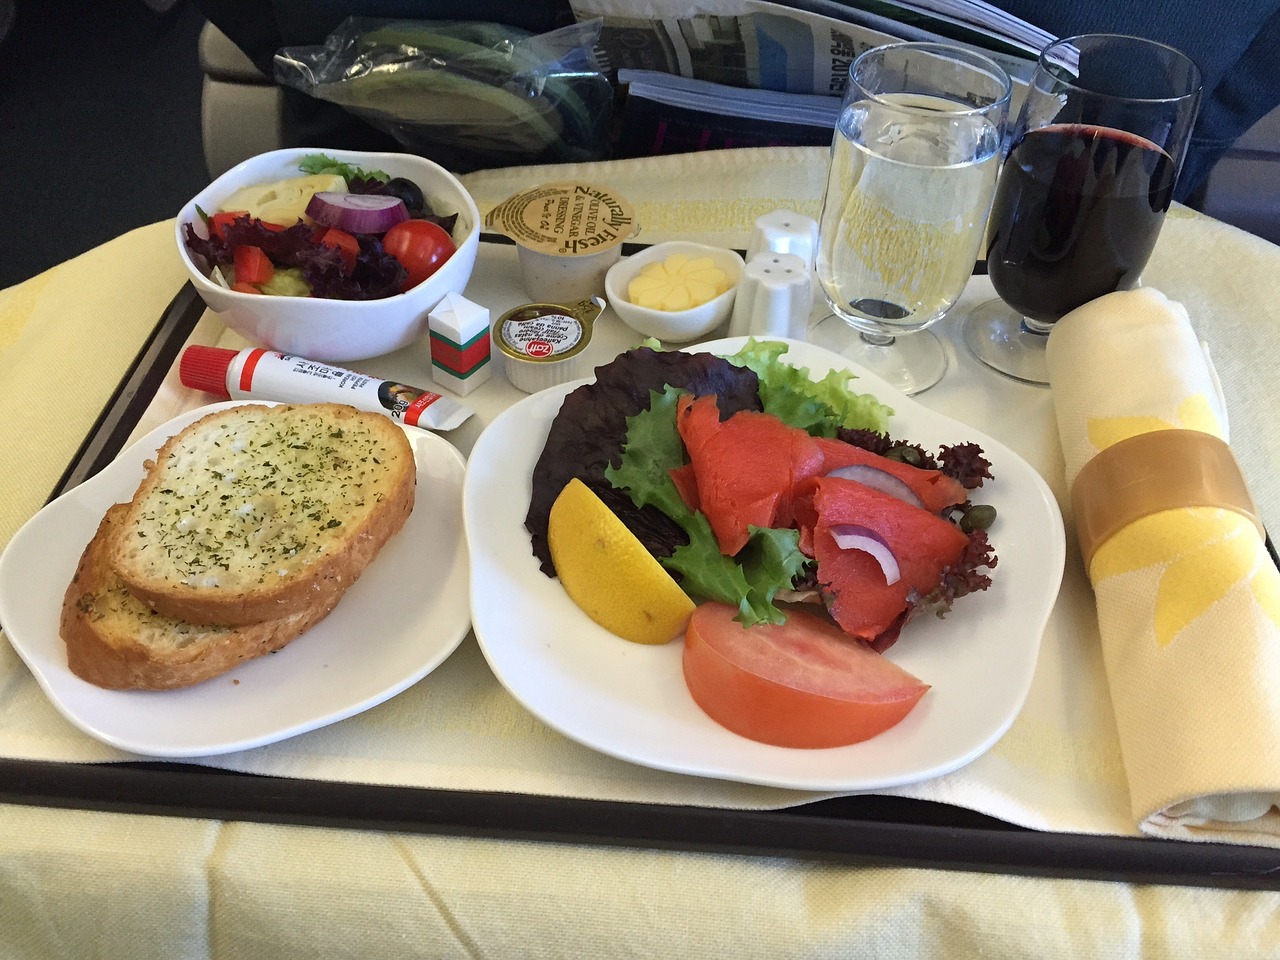 in-flight meal business-class food free photo